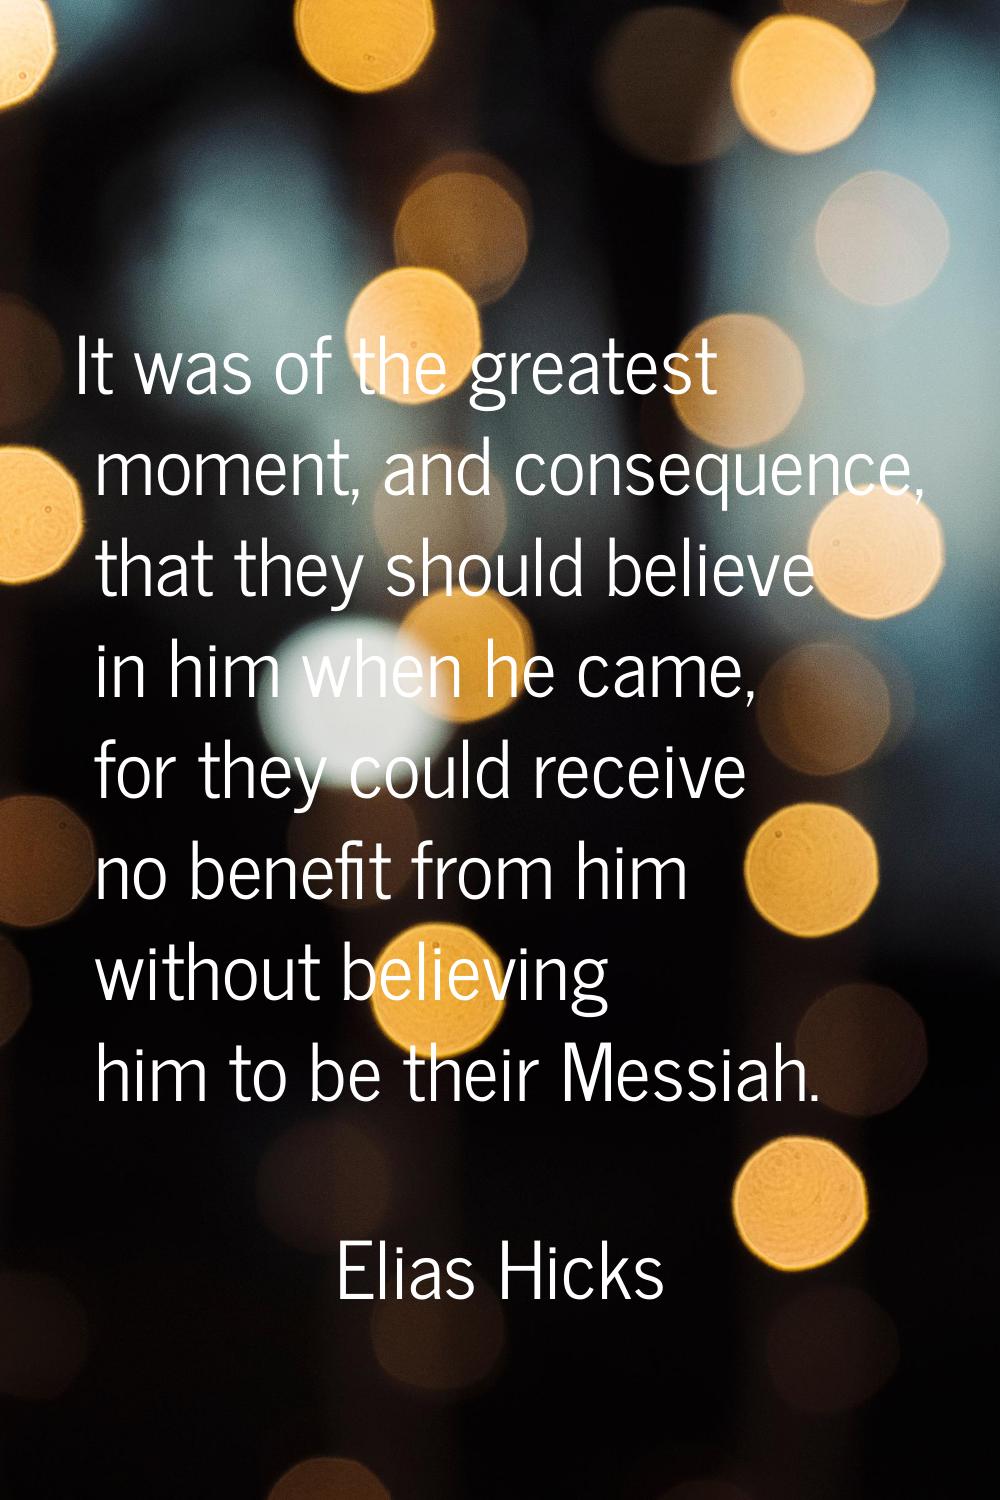 It was of the greatest moment, and consequence, that they should believe in him when he came, for t